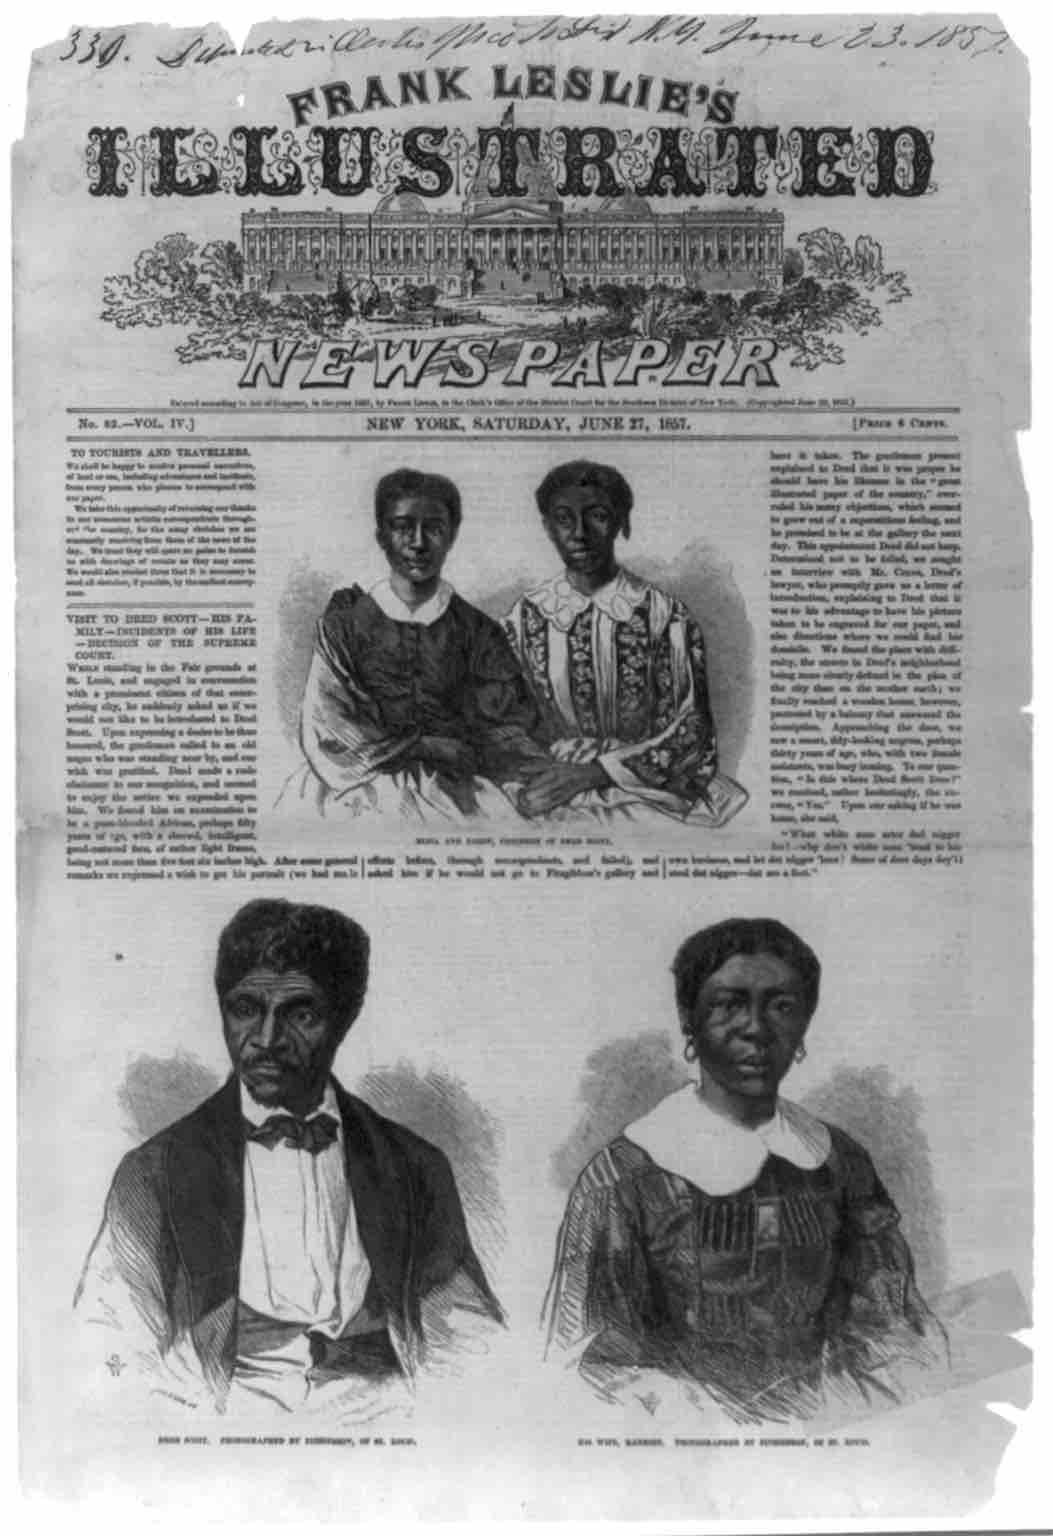 Dred Scott, as pictured at lower left in Frank Leslie's Illustrated Newspaper, June 27, 1857. (Courtesy of Library of Congress )